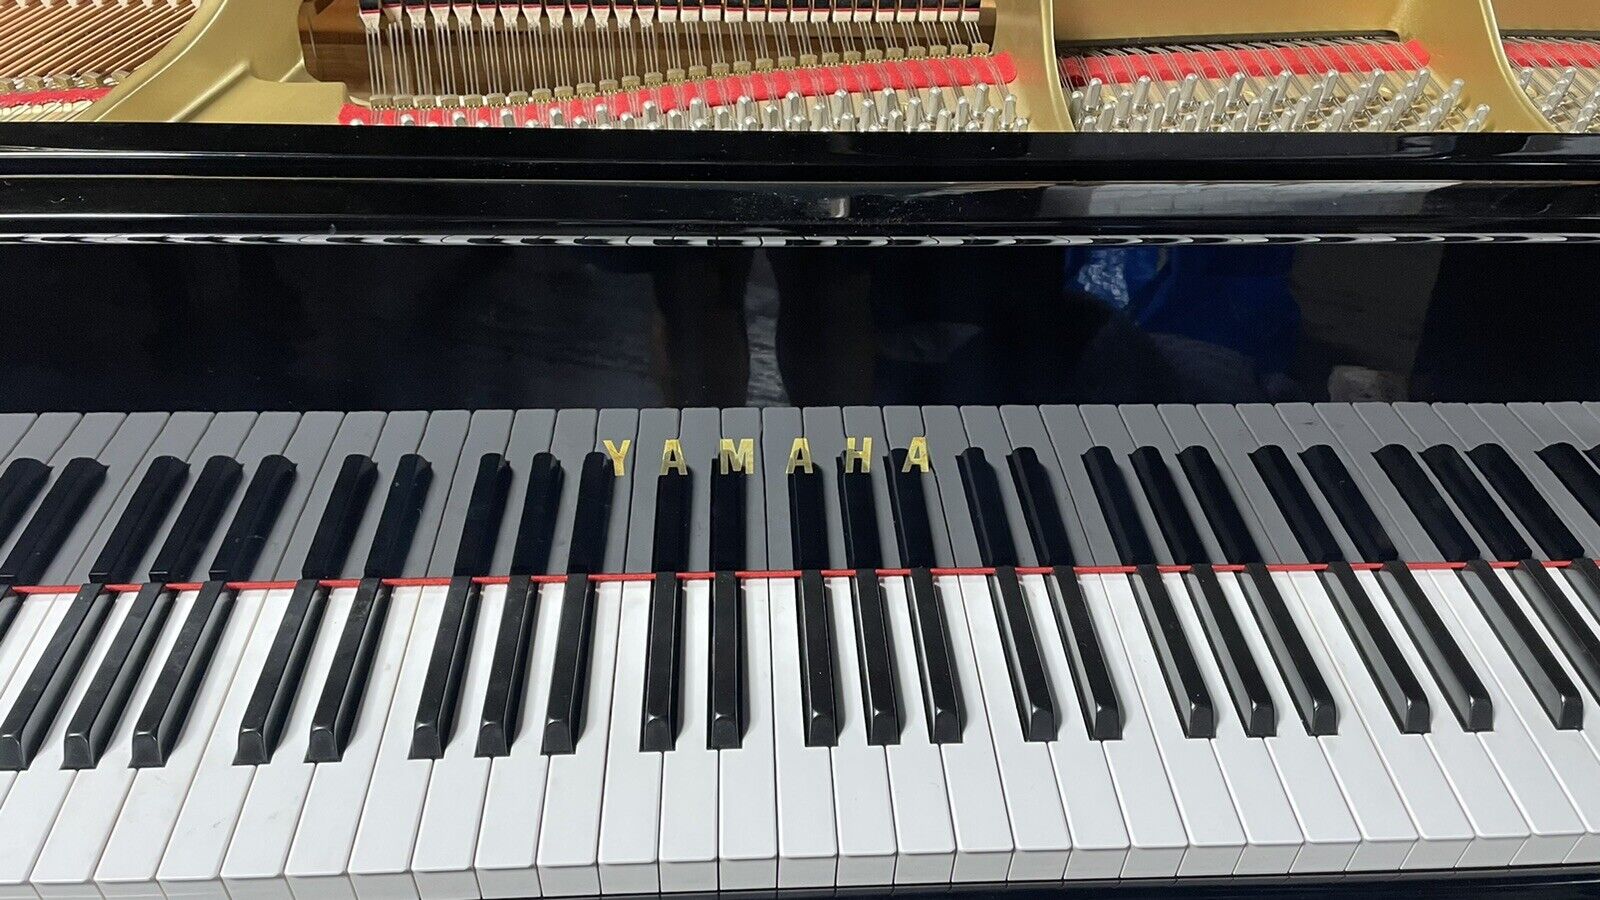 1992 Yamaha Gh1 Baby Grand (5’3”) - Excellent Condition